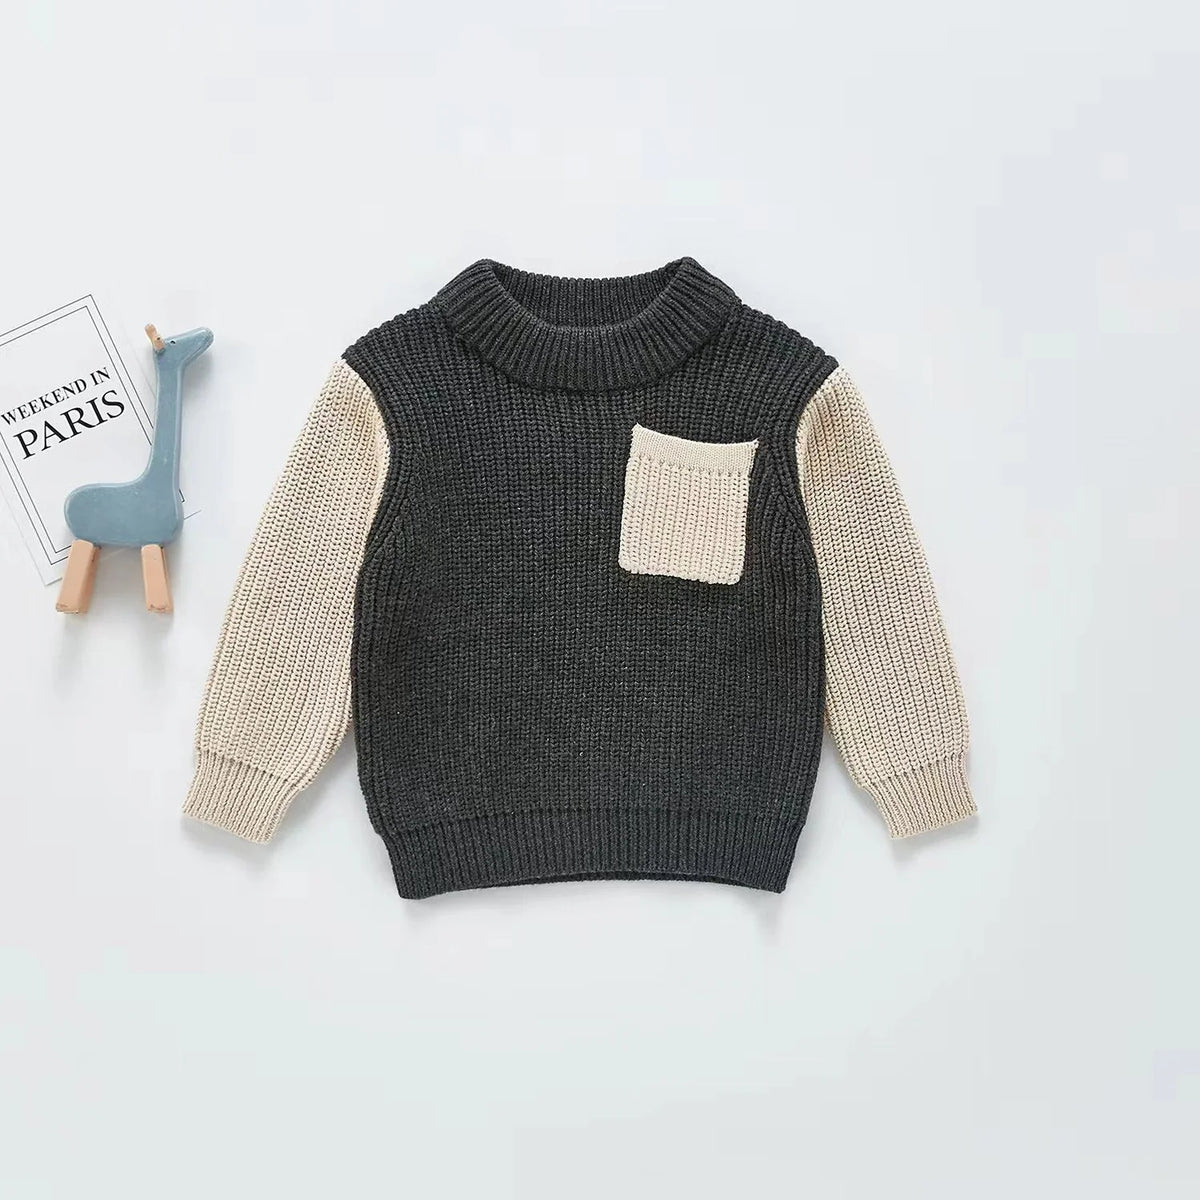 Marty Pocket Color Block Sweater